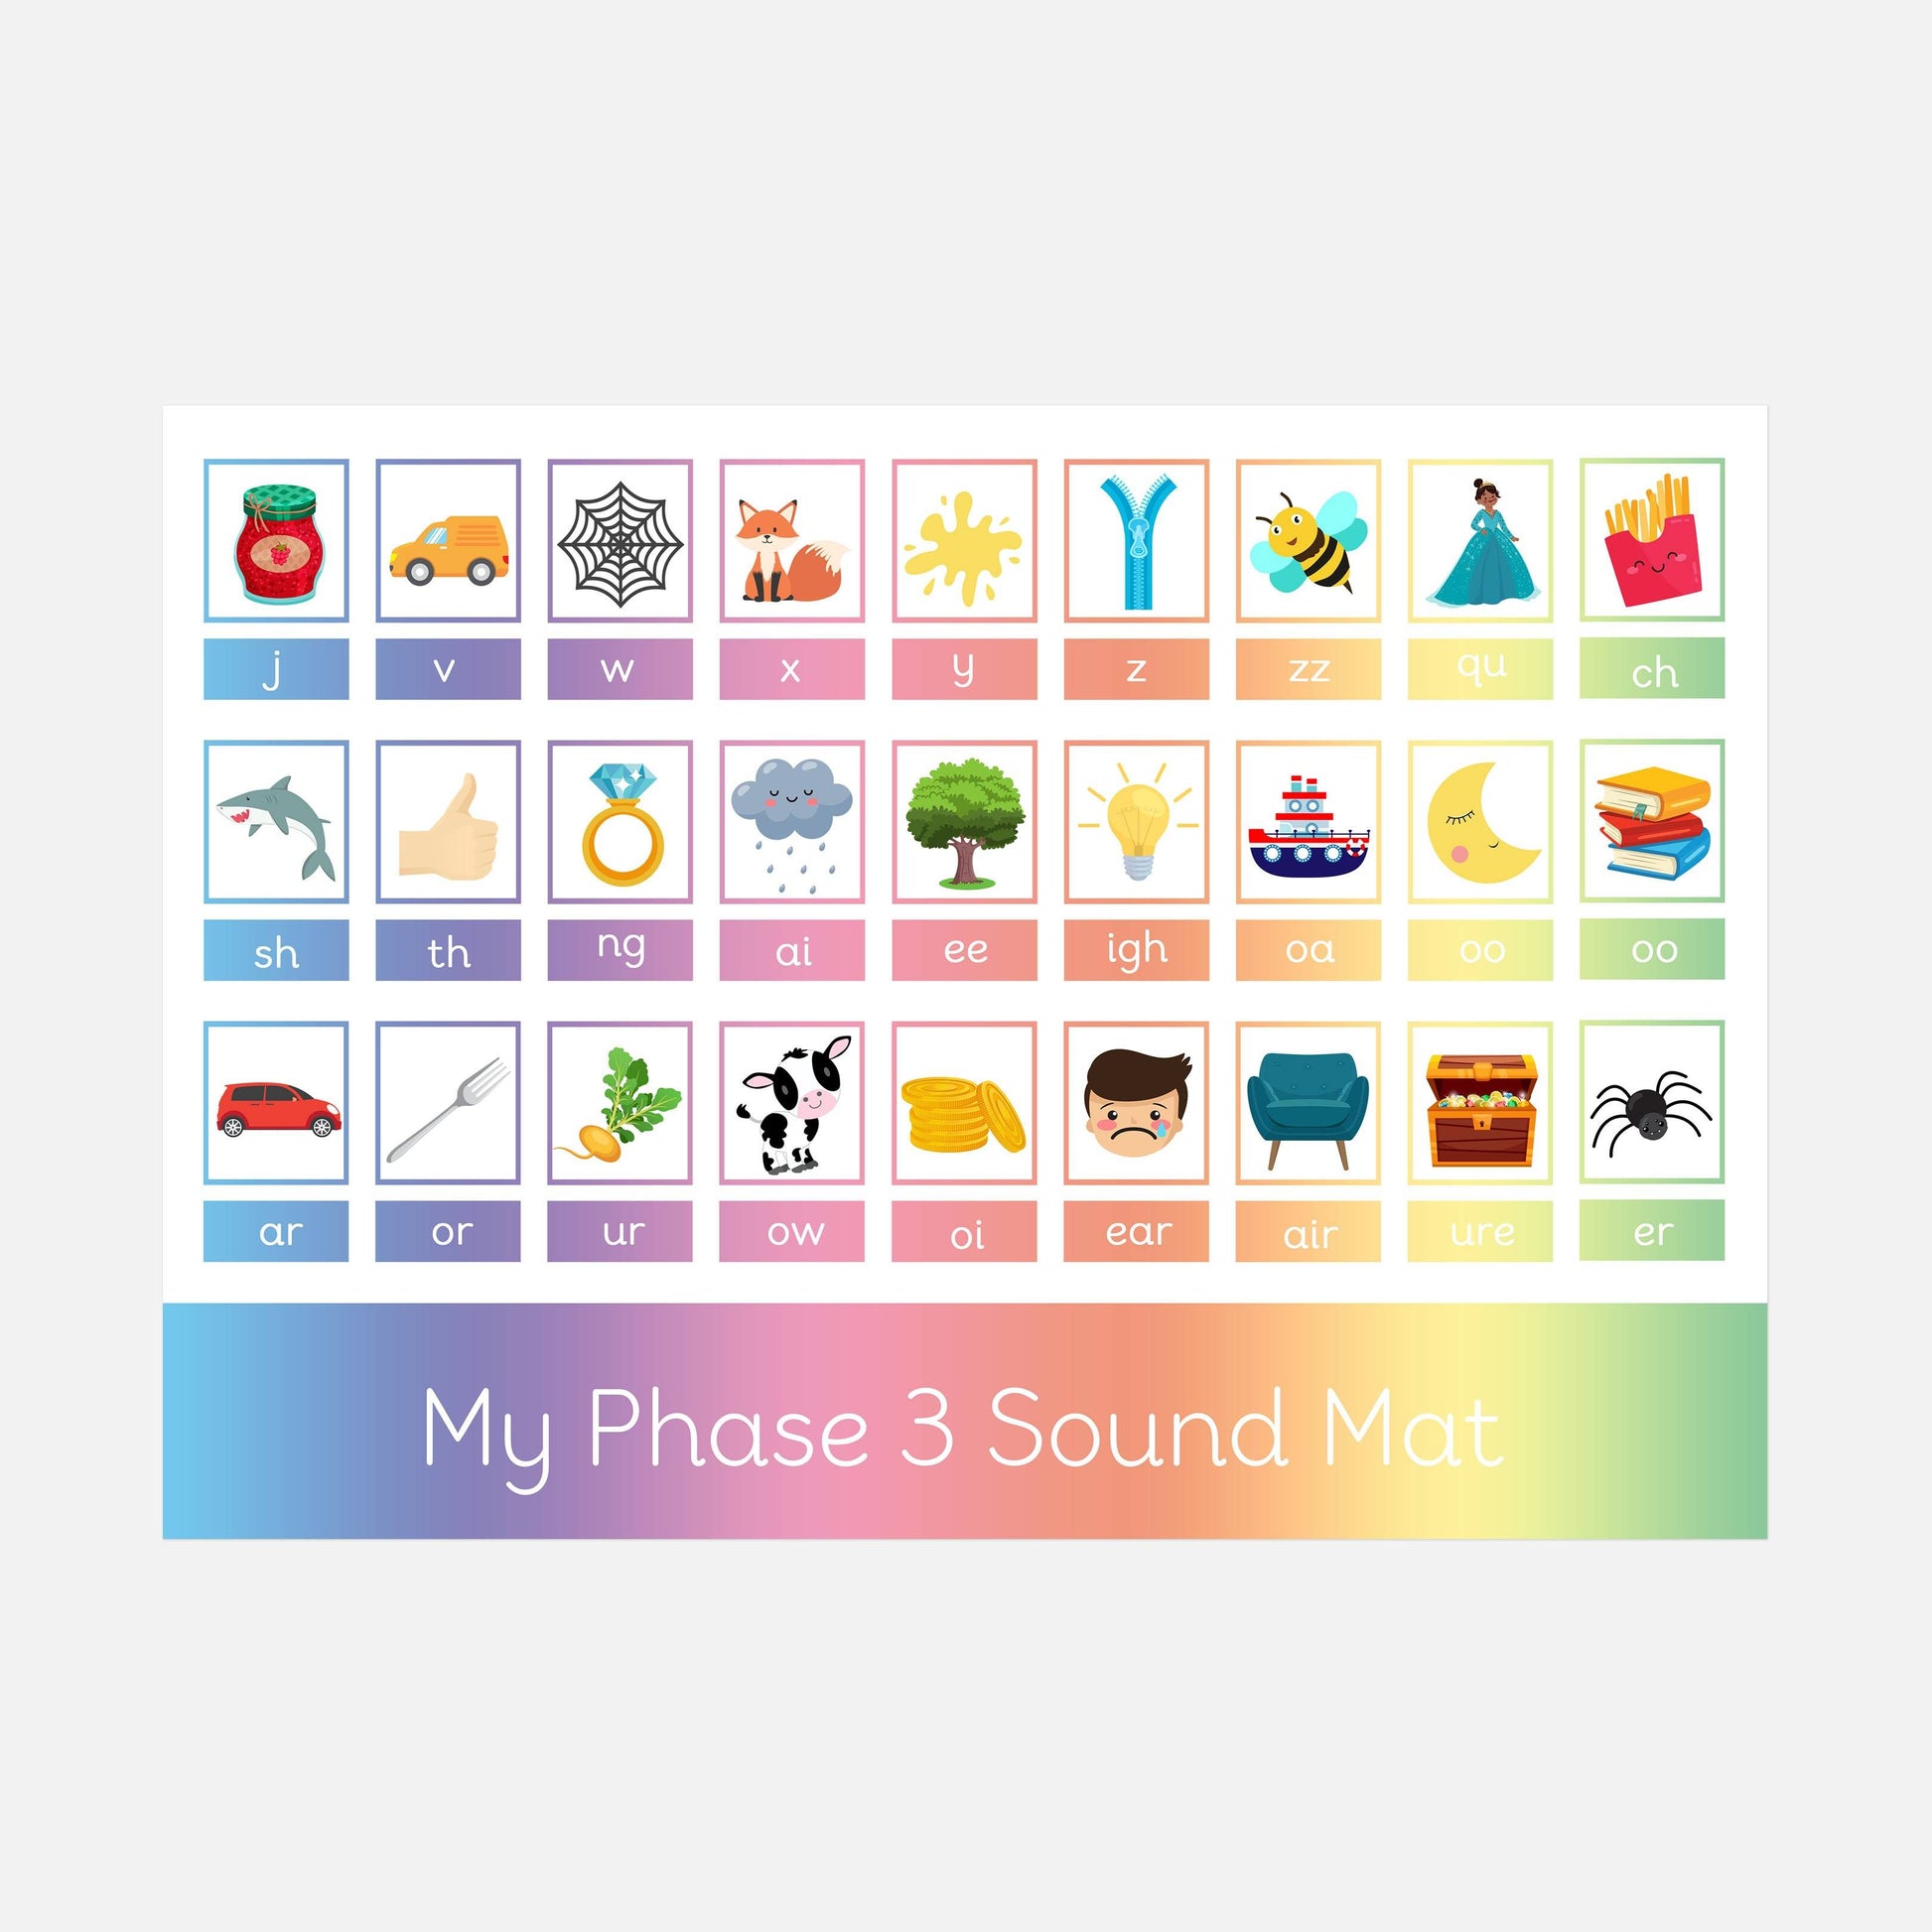 READY-TO-POST Phonics Phase 3 Sound Mat-Little Boo Learning-Phonics